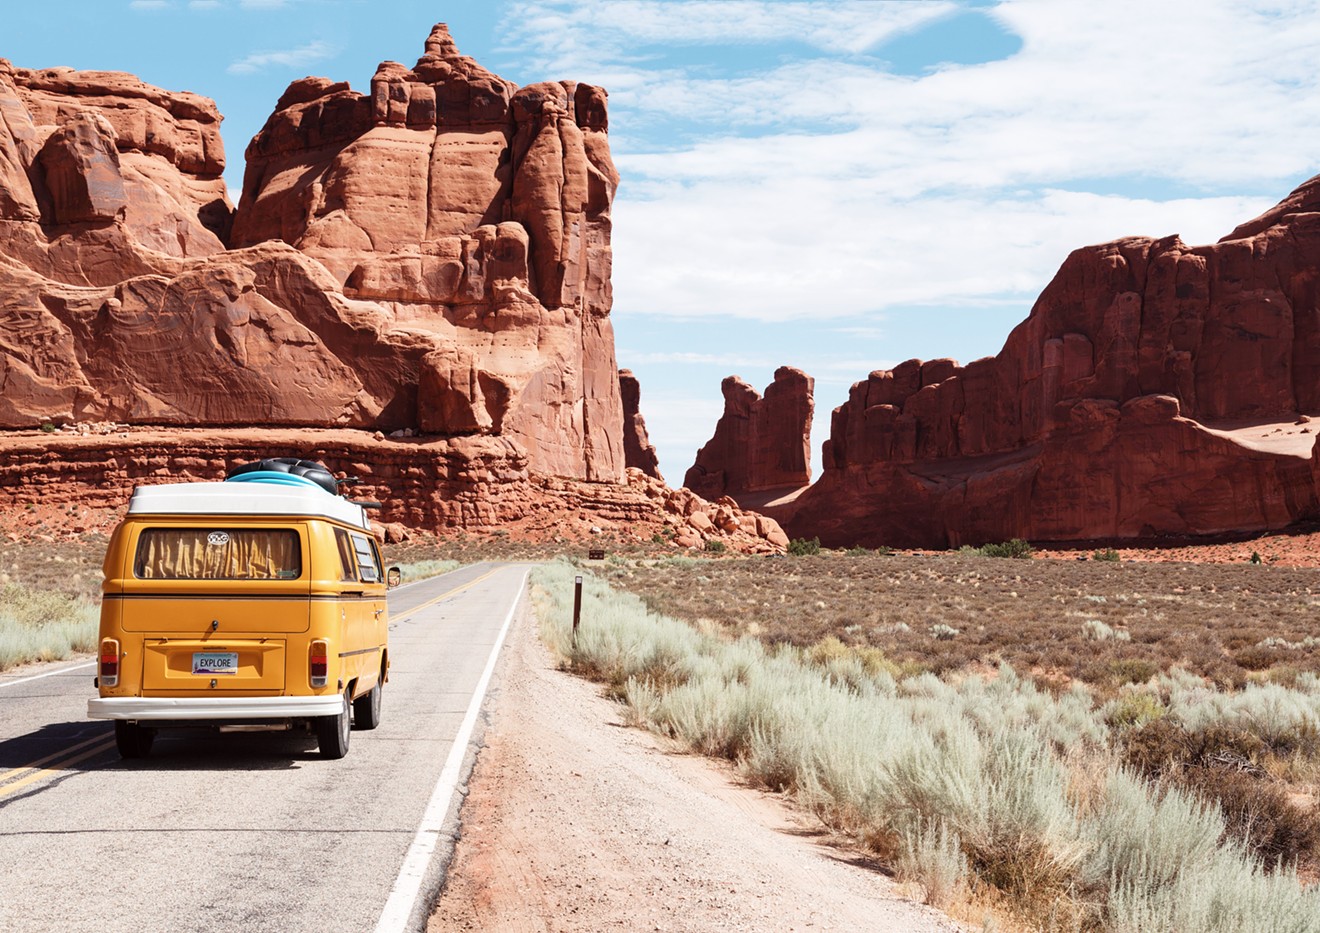 Driving through Moab? Keep your stash secret until arriving at your destination, or you could risk a fine or even jail time.